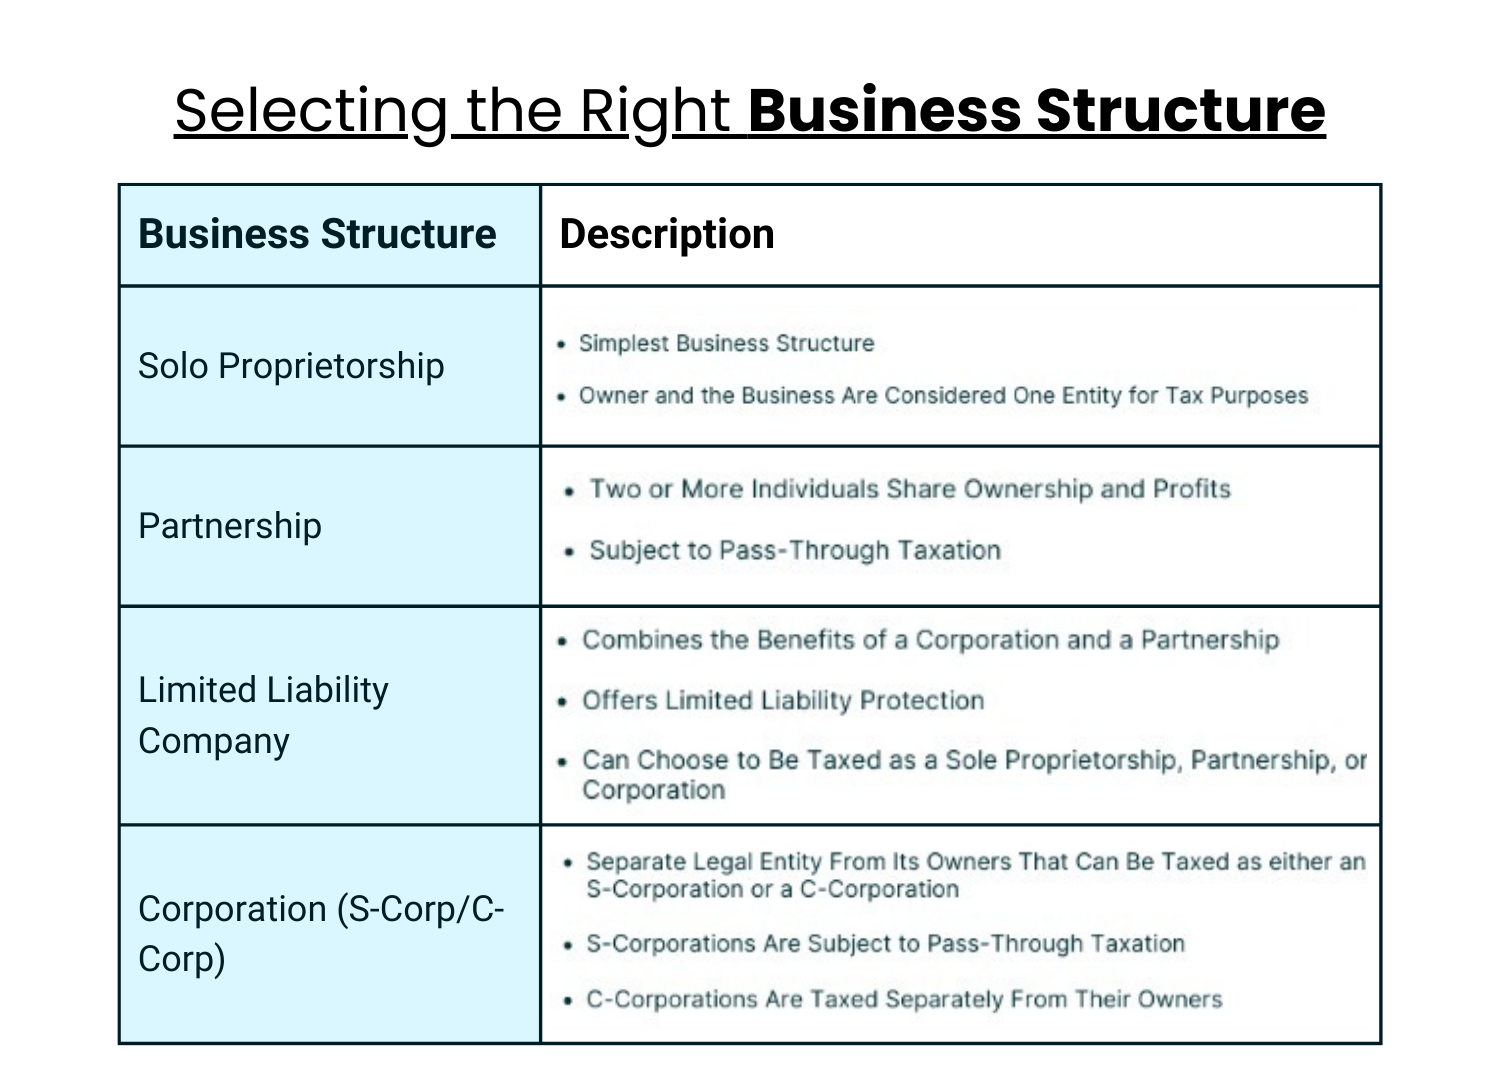  Business Structure